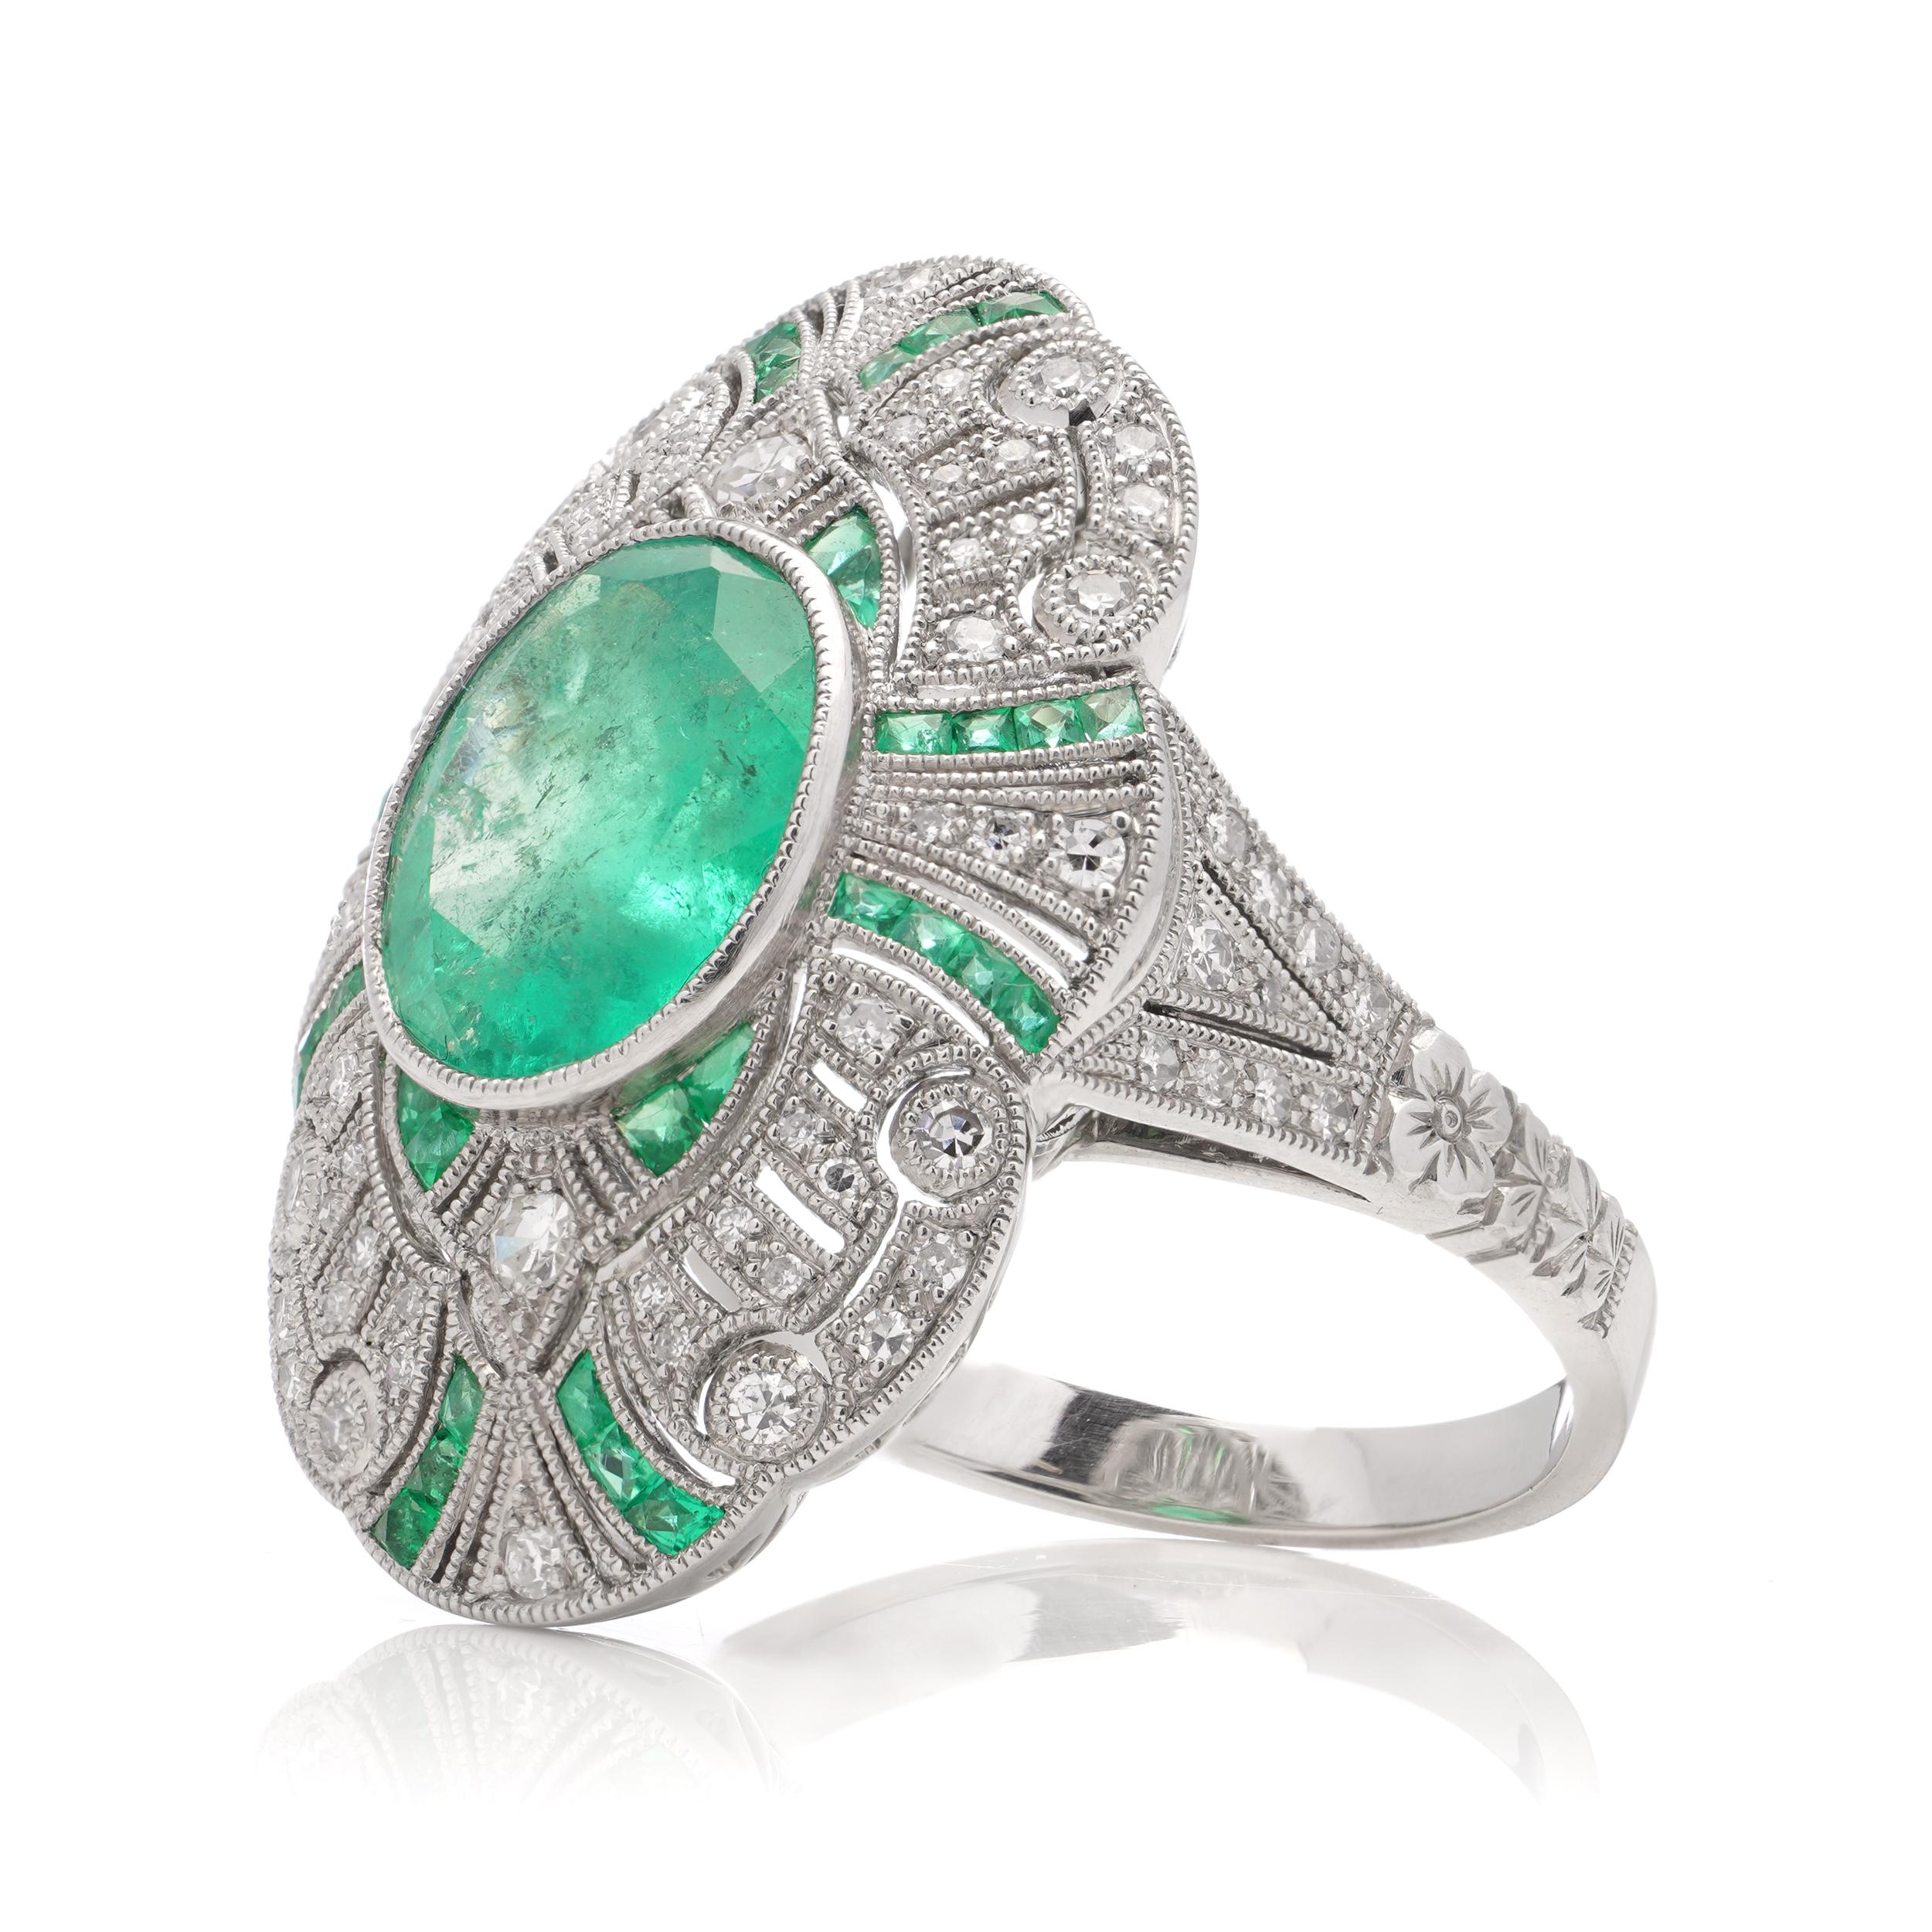 Platinum Art Deco-inspired 3.62 carats of Emerald fashion ring For Sale 2